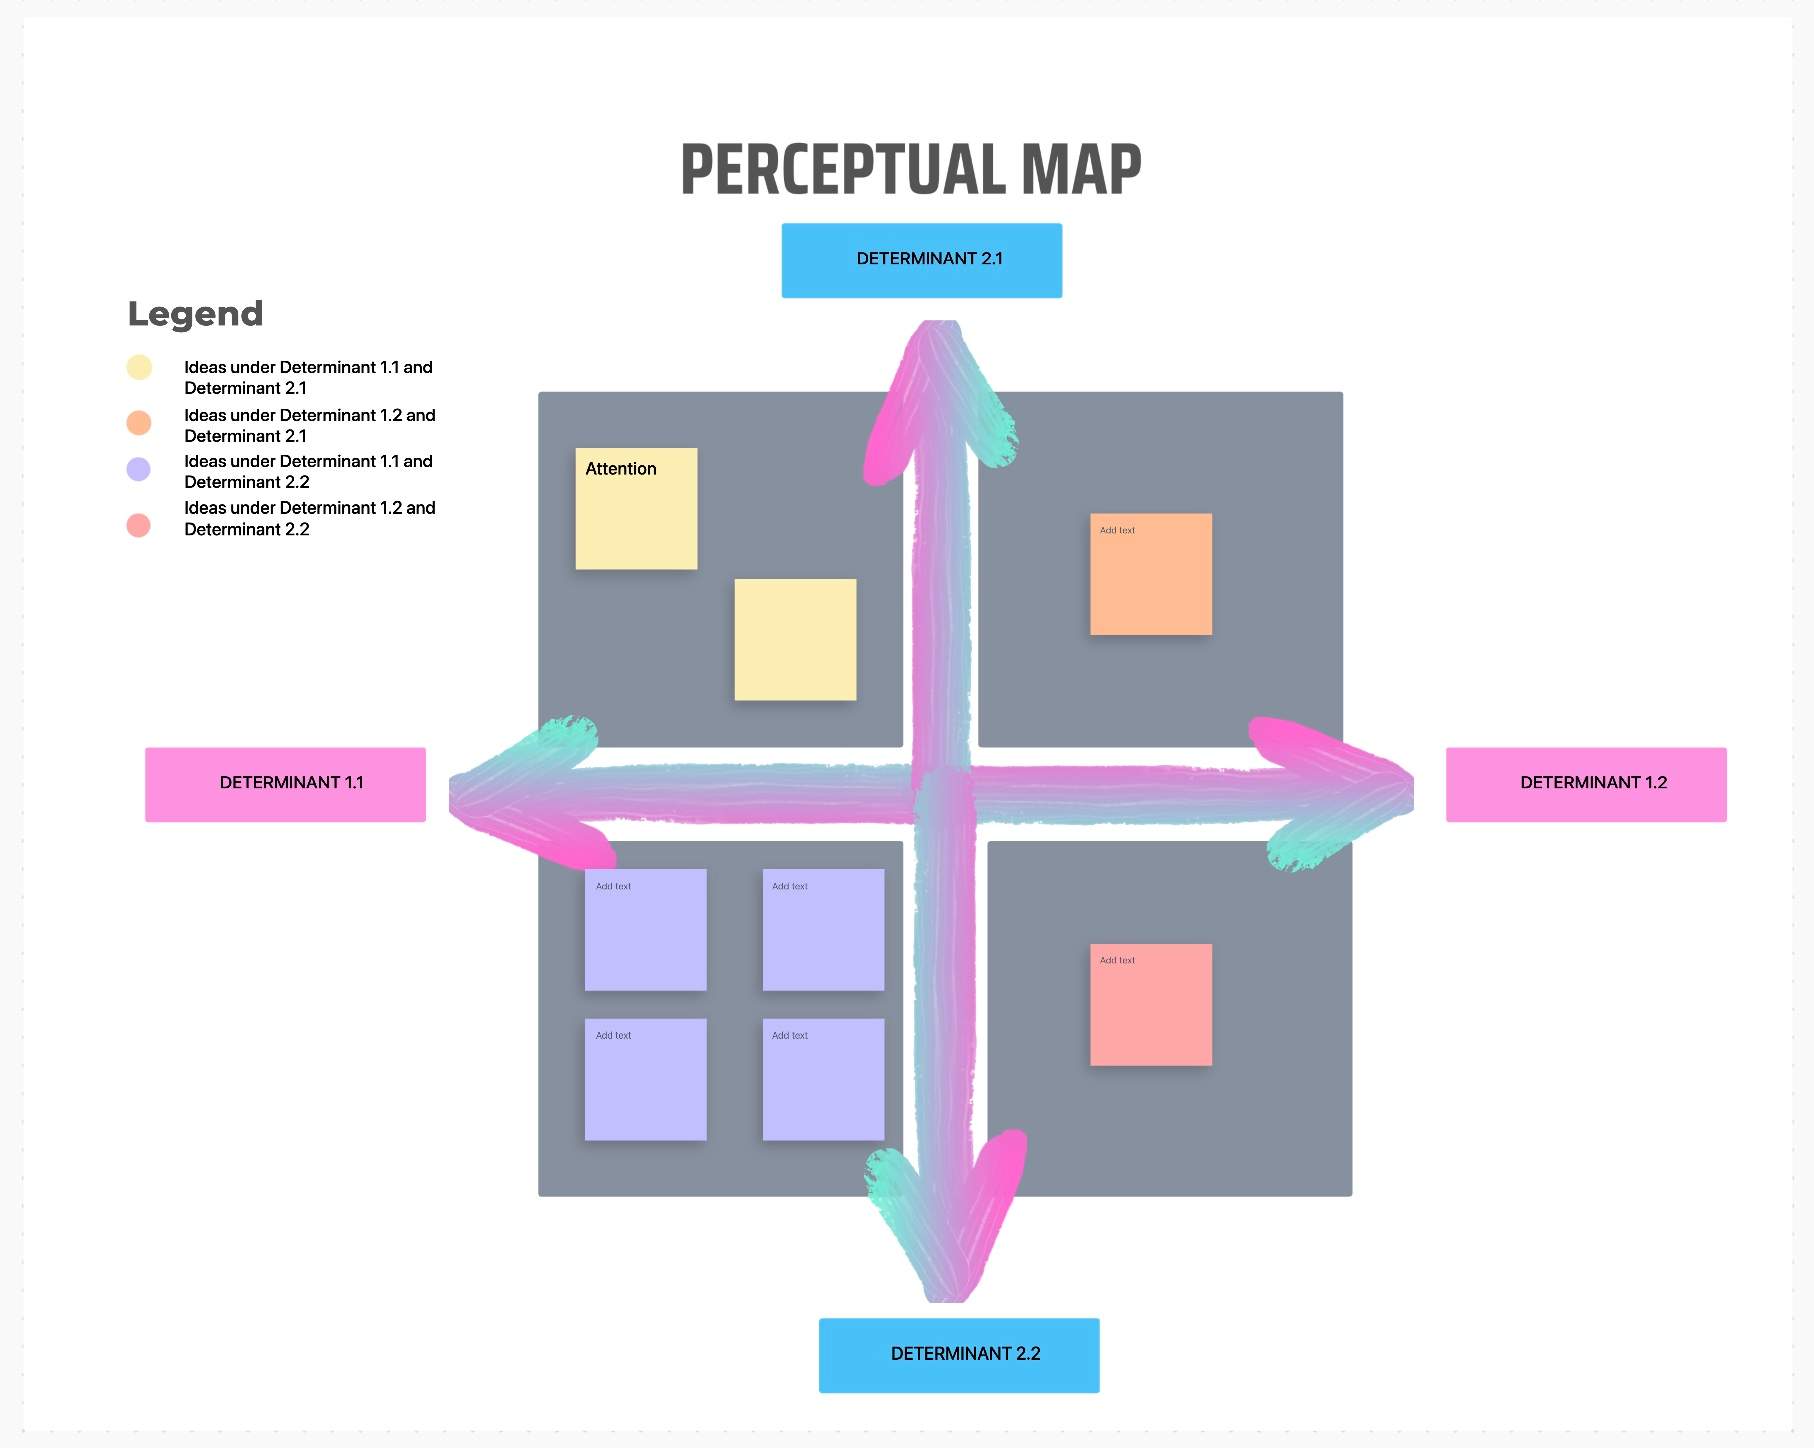 A Perceptual Map (PERMAP) is a visual Whiteboard tool that is used in marketing to position ideas, product, brands, competitors or price. It is usually plotted in x-y axes with two significant determinants.